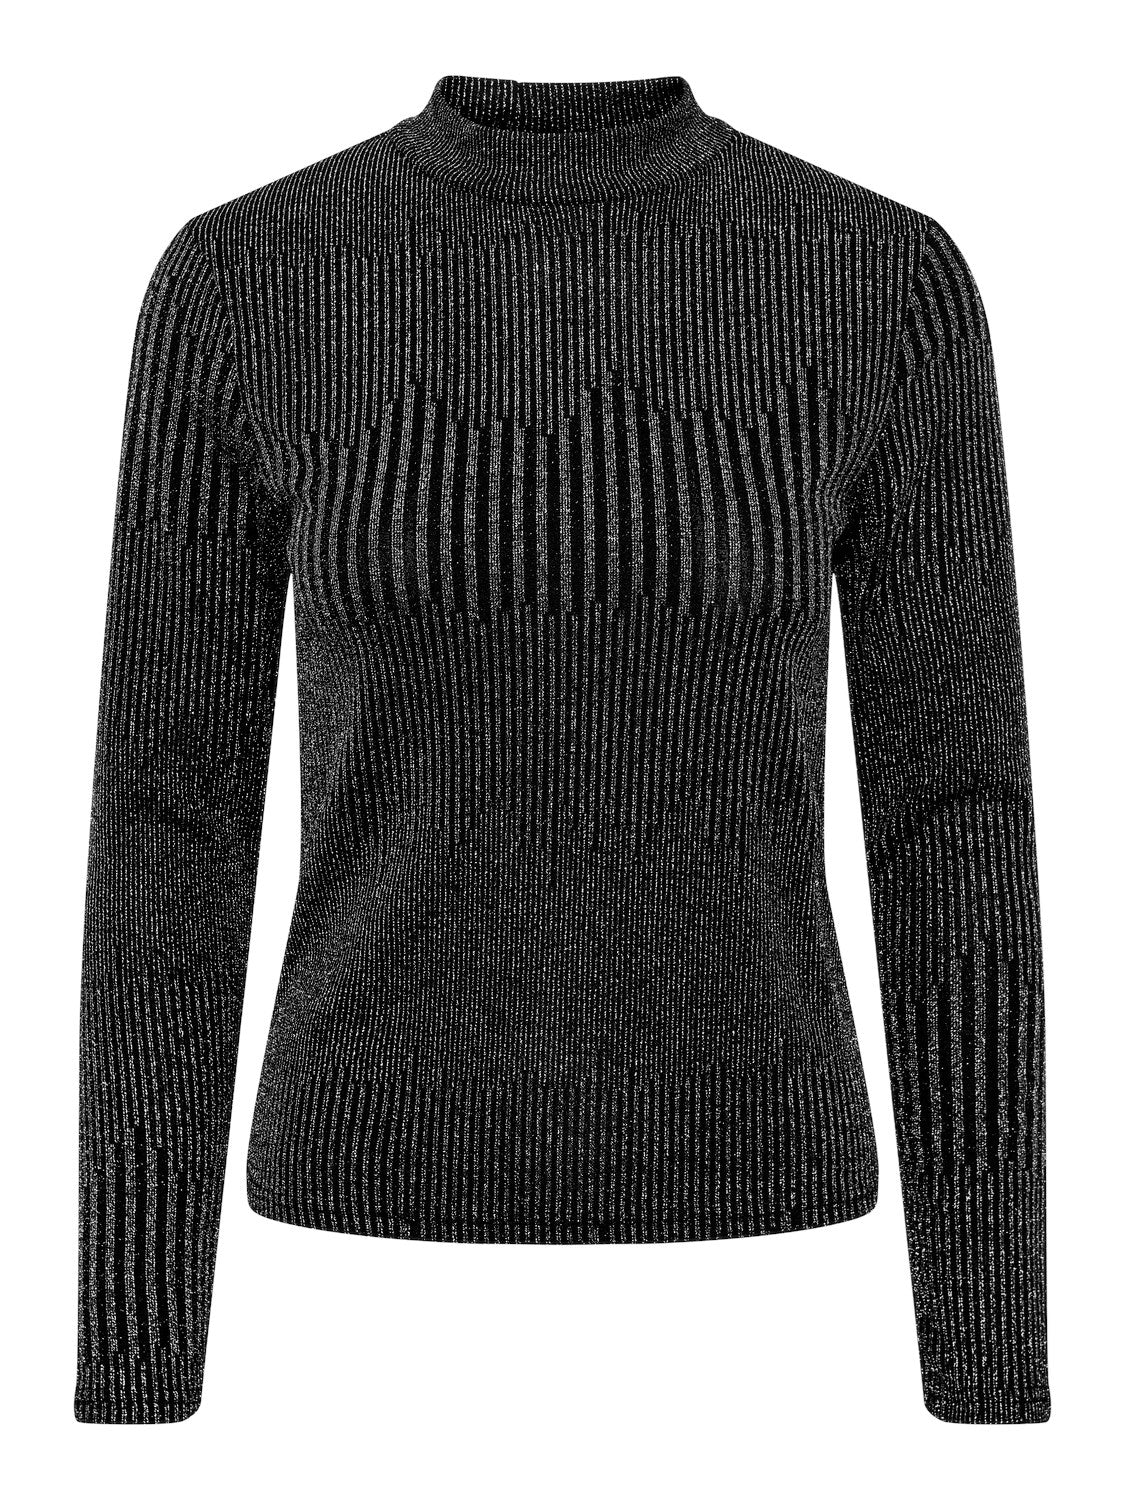 Mary Top - Black Silver Lurex